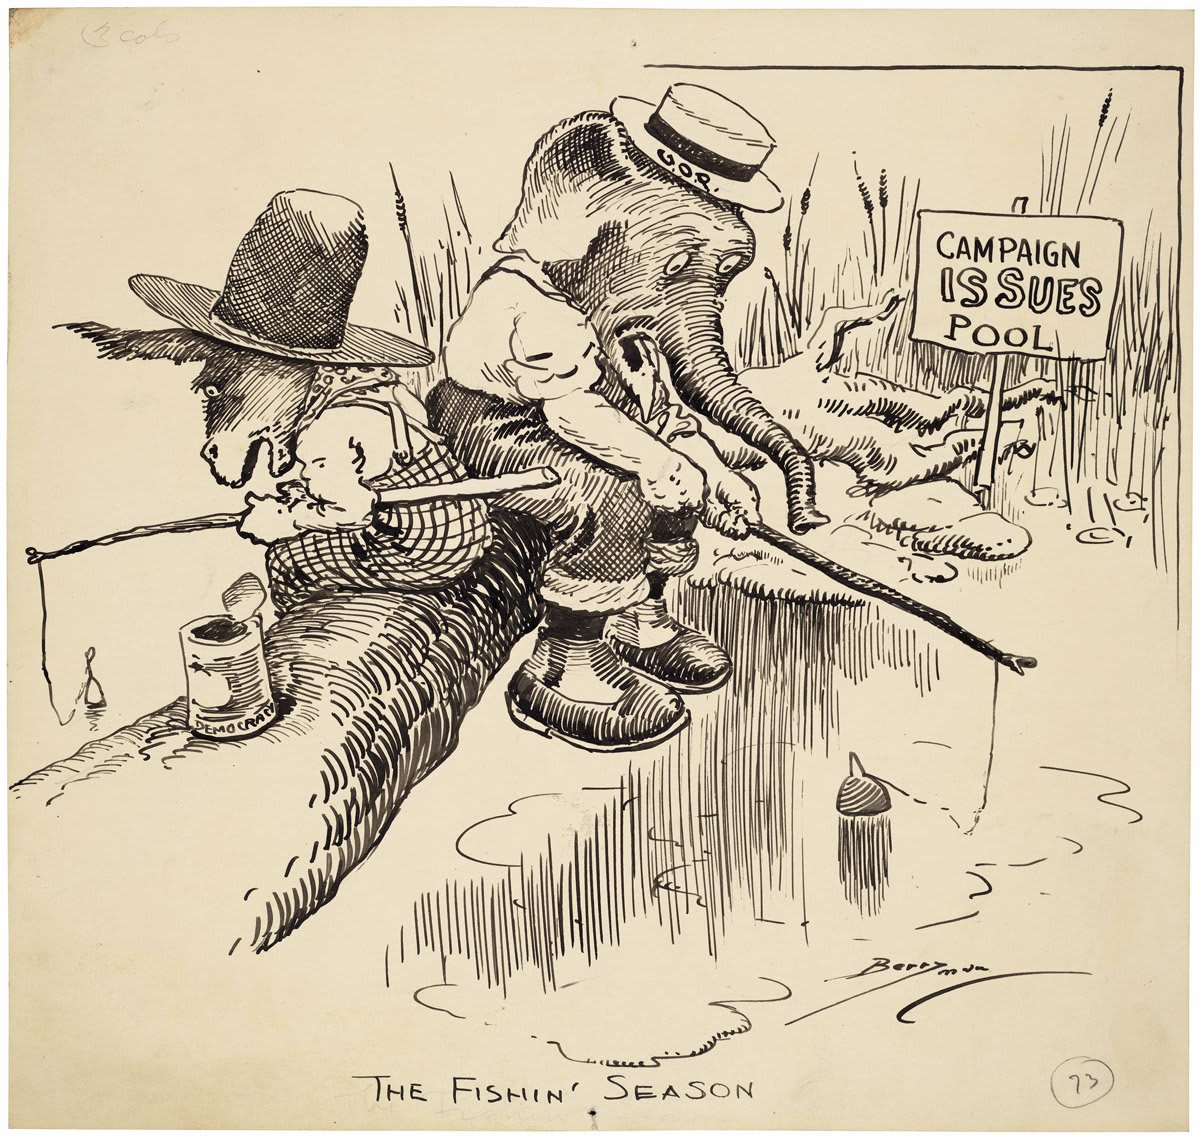 This political cartoon from 100 years ago OTD captures the Republican elephant and the Democratic donkey seated on the same log fishing in a different kind of pool...the "campaign issues pool."